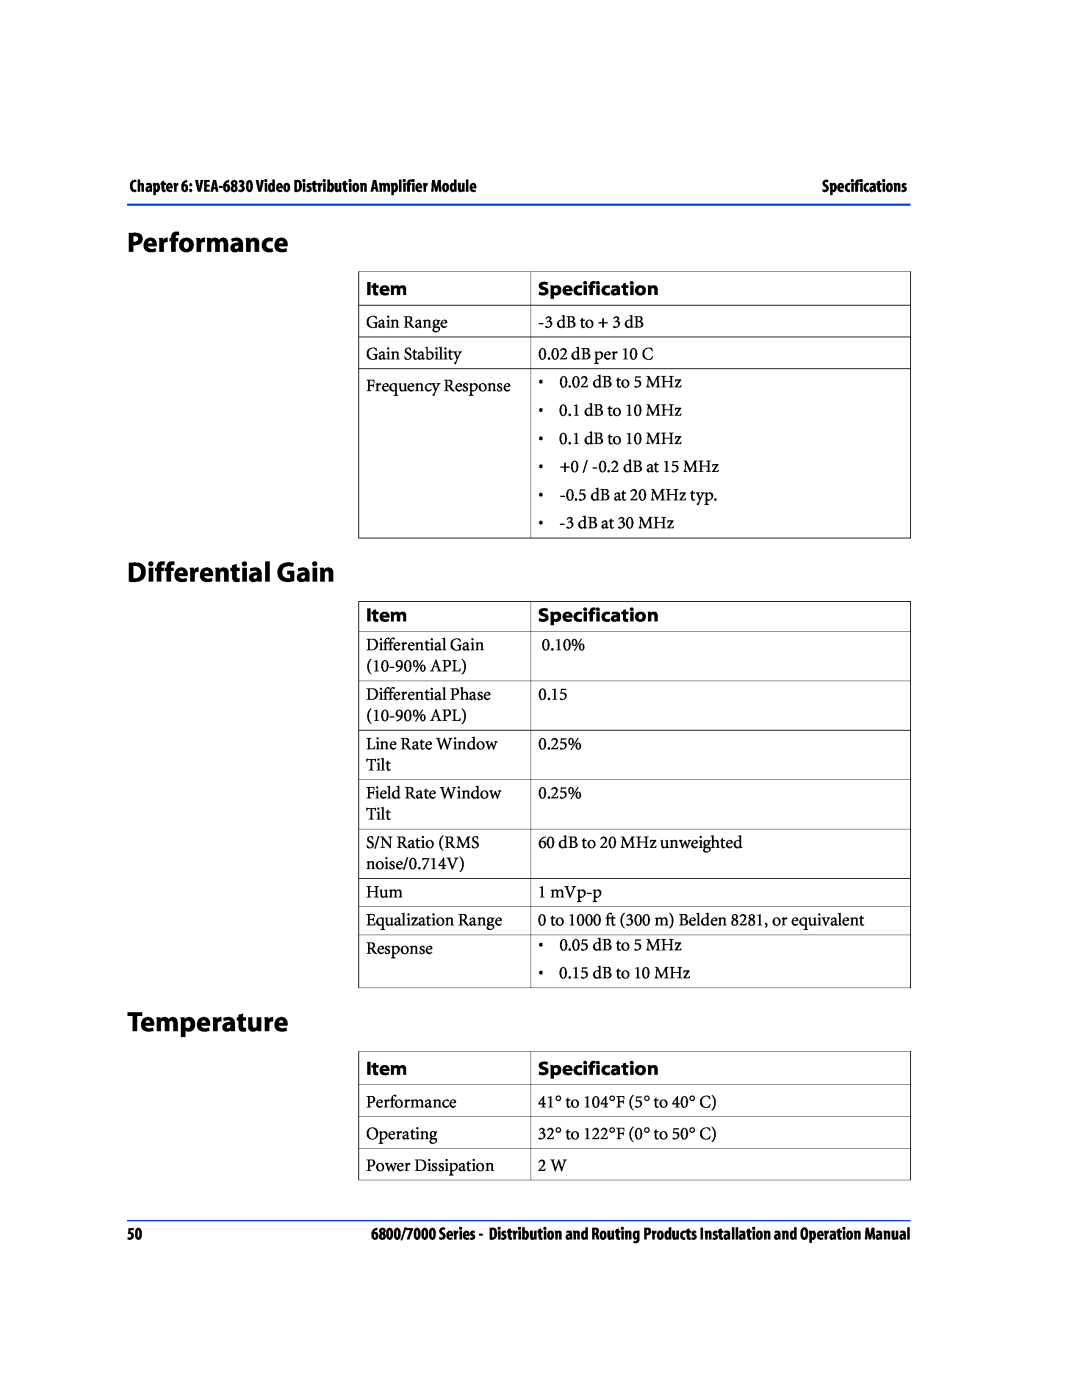 Nokia 7000 Series, 6800 Series operation manual Differential Gain, Performance, Temperature, Specification 